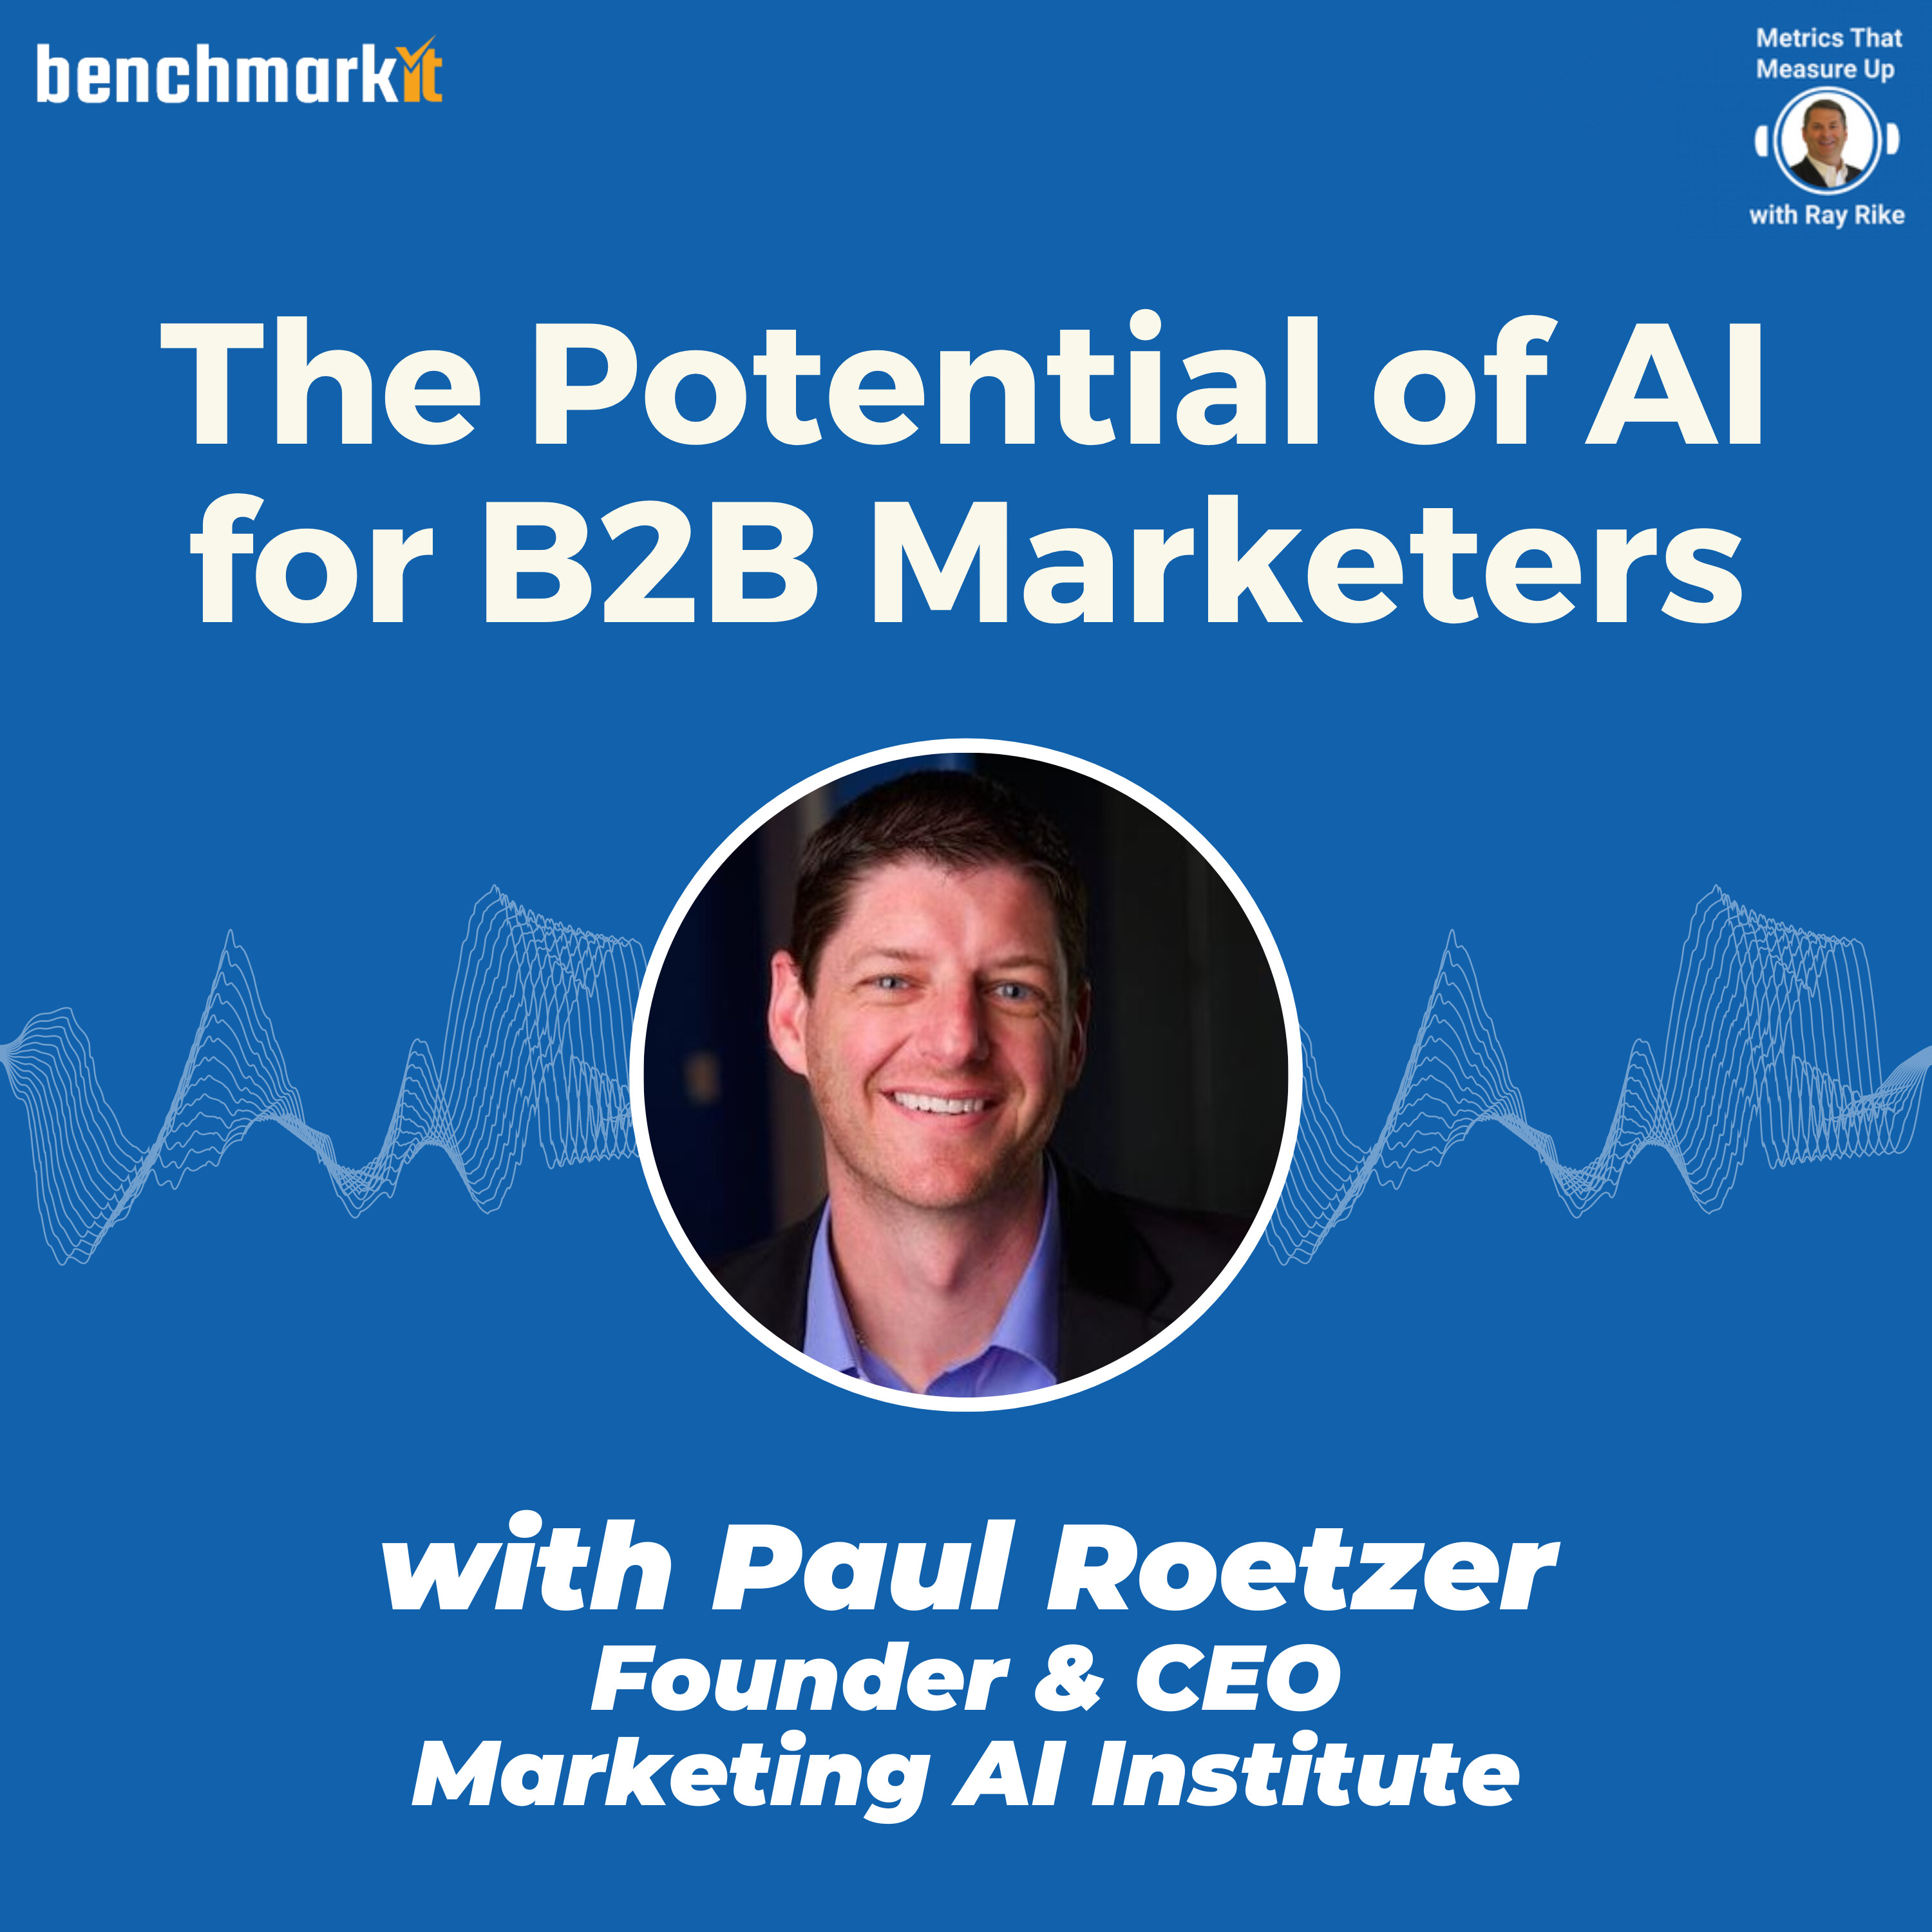 The potential of AI for B2B Marketers - with Paul Roetzer, Founder and CEO Marketing AI Institute